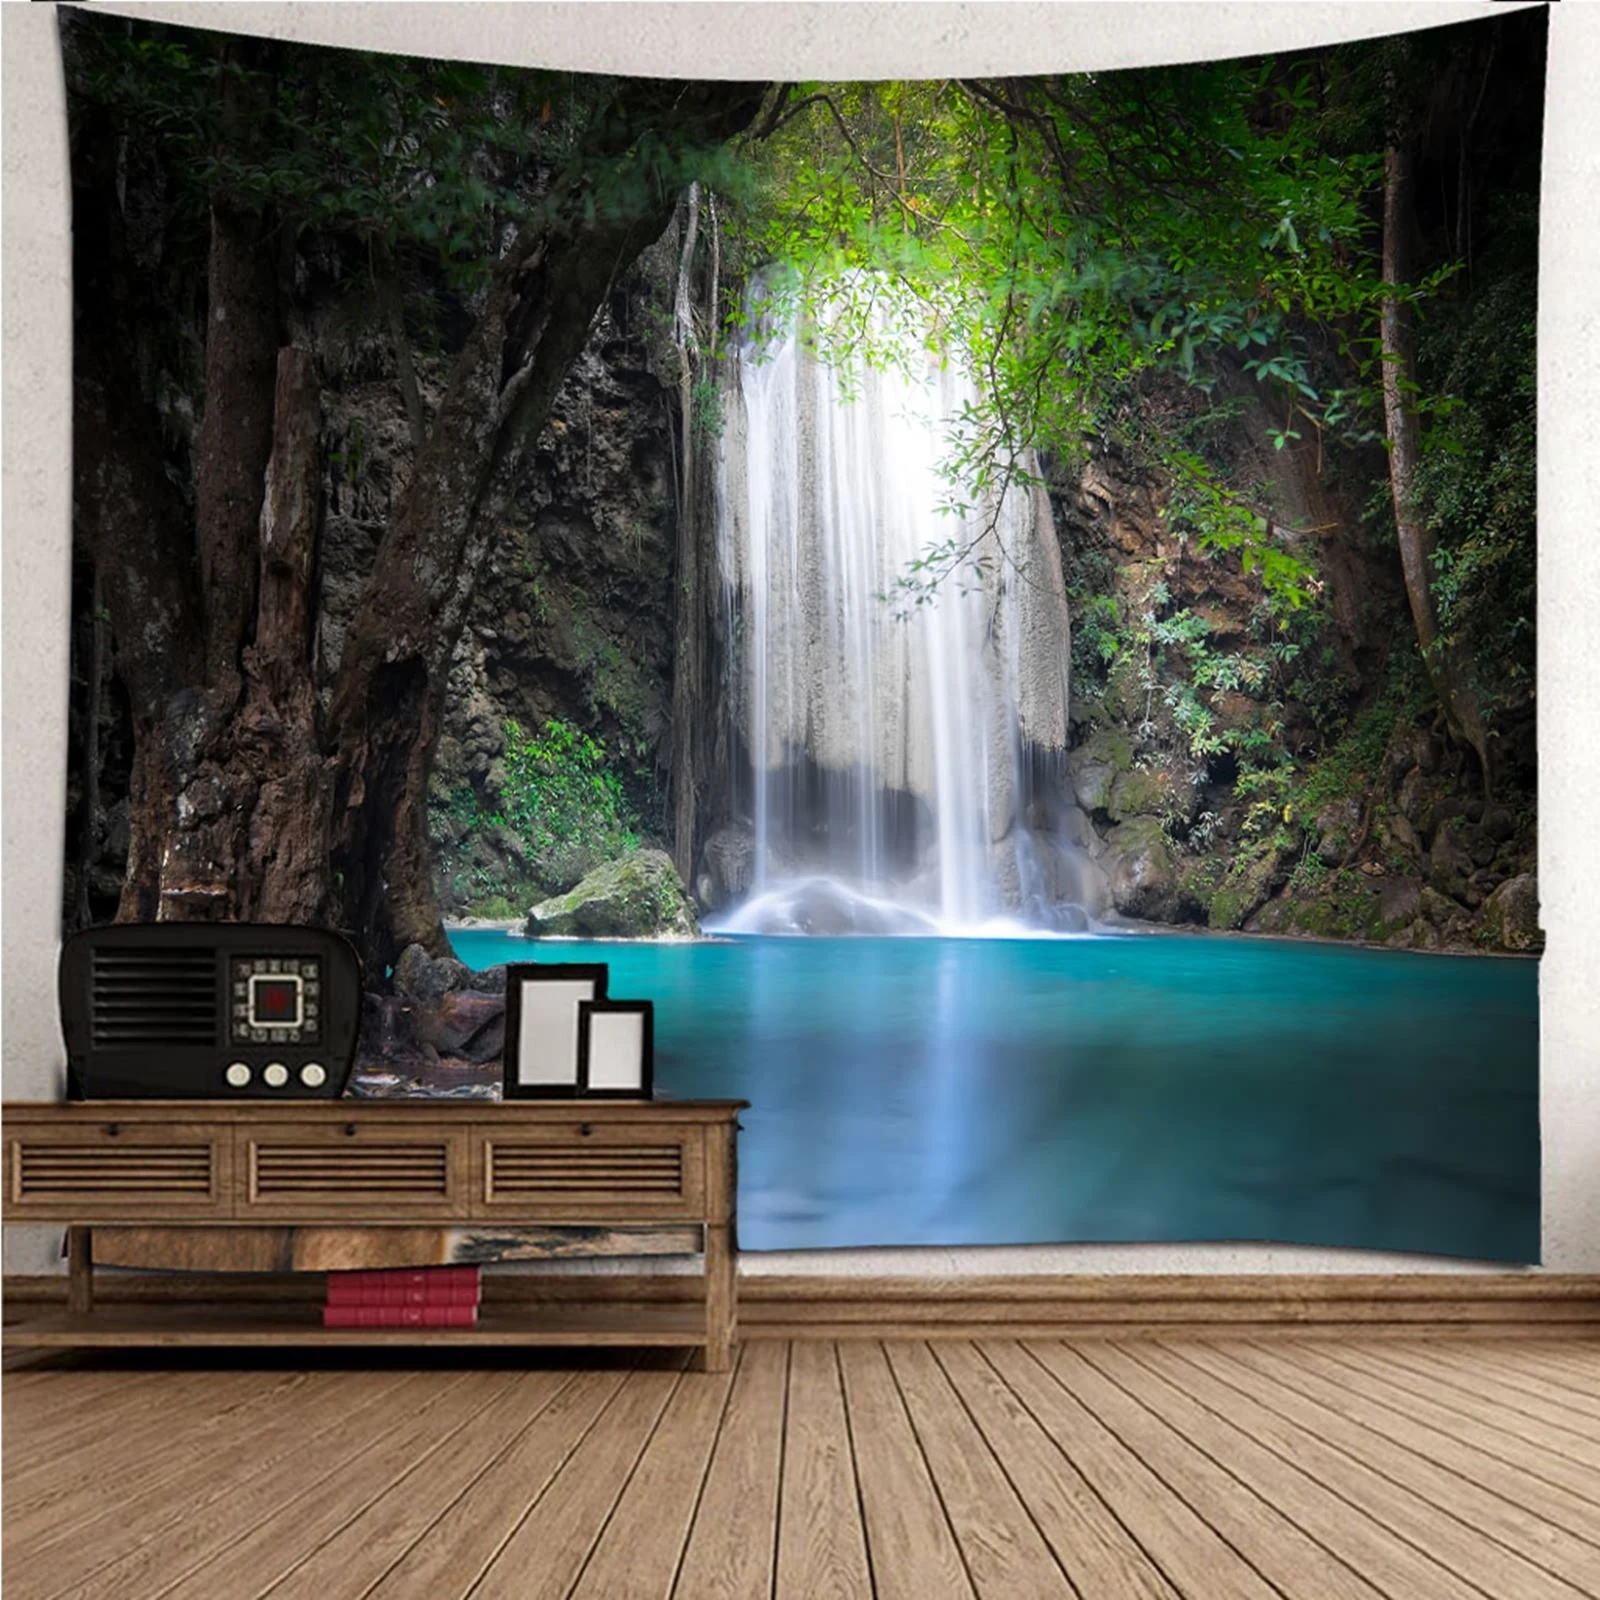 

Female Tapestry Colorful Tapestry Small natural scenery Waterfall & Lake in the Forest Wall Hanging Blanket Dorm Art Decor